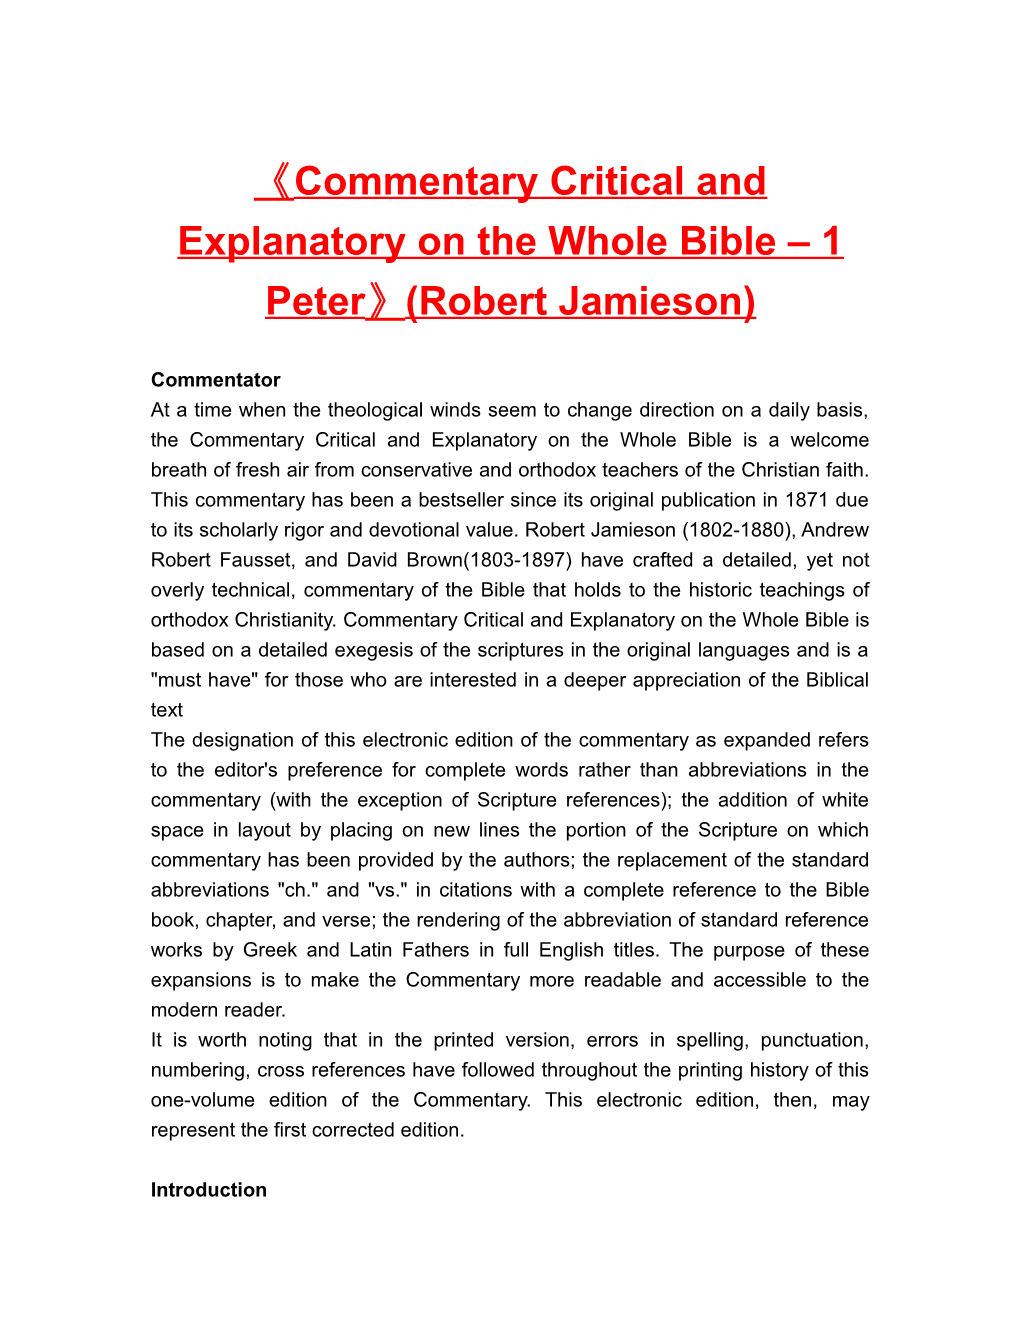 Commentary Critical and Explanatory on the Whole Bible 1 Peter (Robert Jamieson)